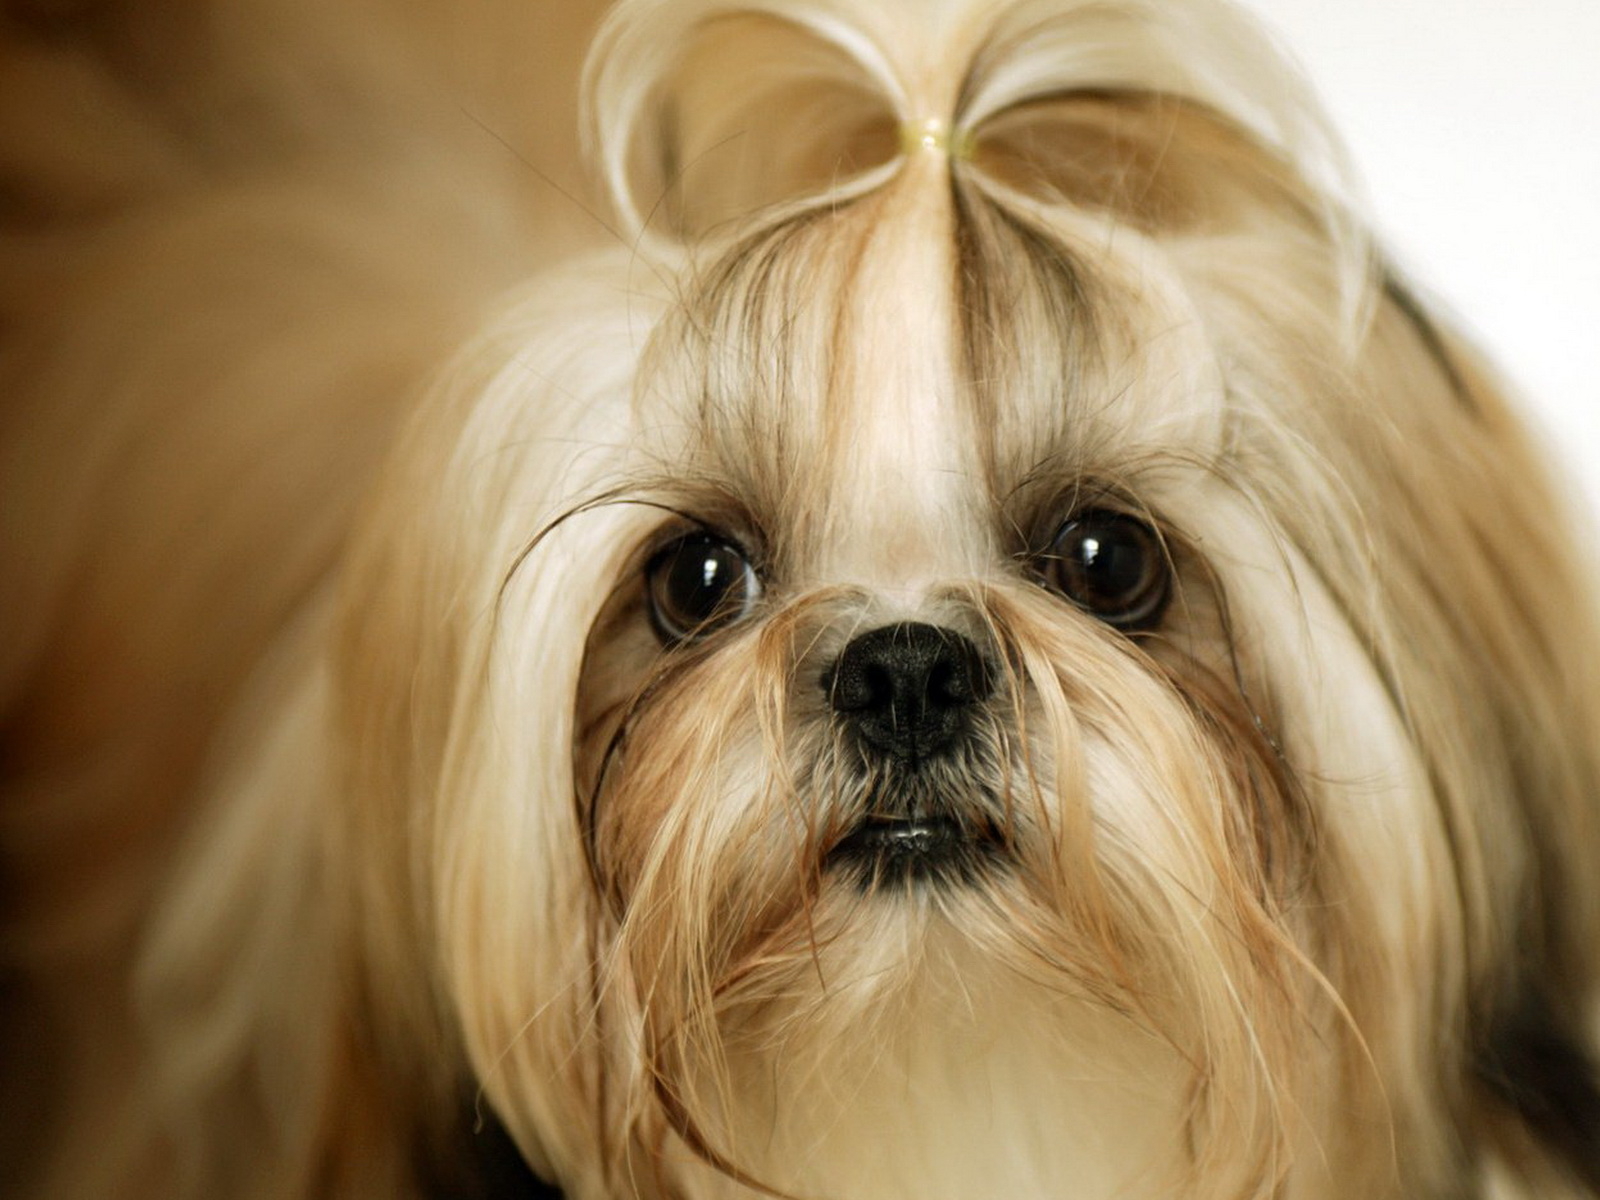 Shih Tzu wallpapers and images - wallpapers, pictures, photos